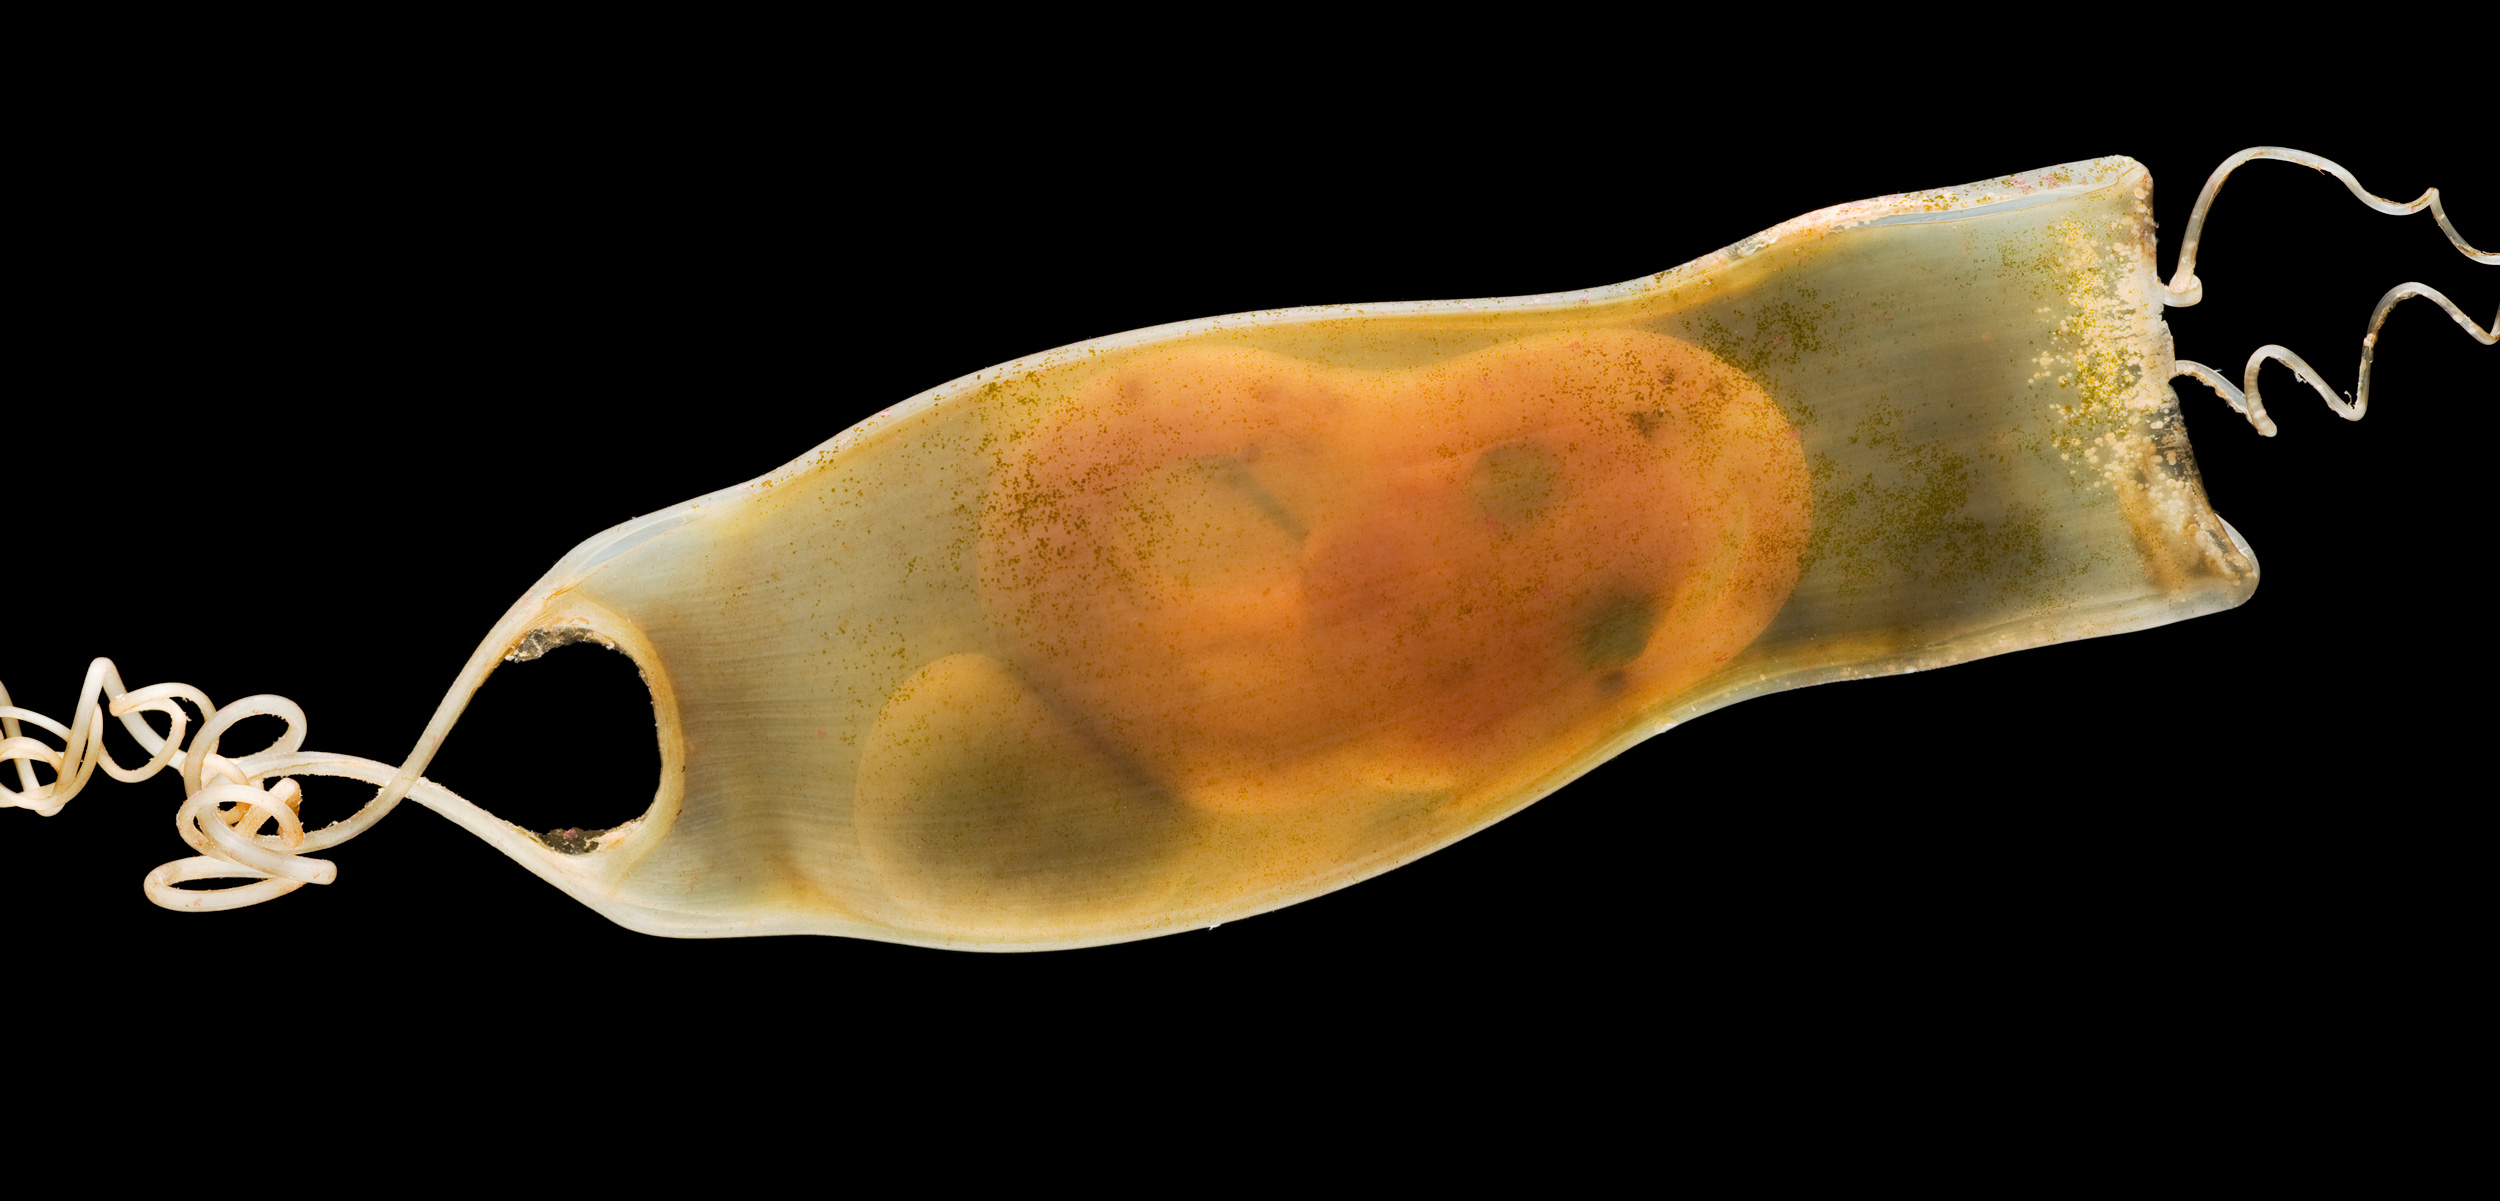 Embryonic catshark pouch on a black background